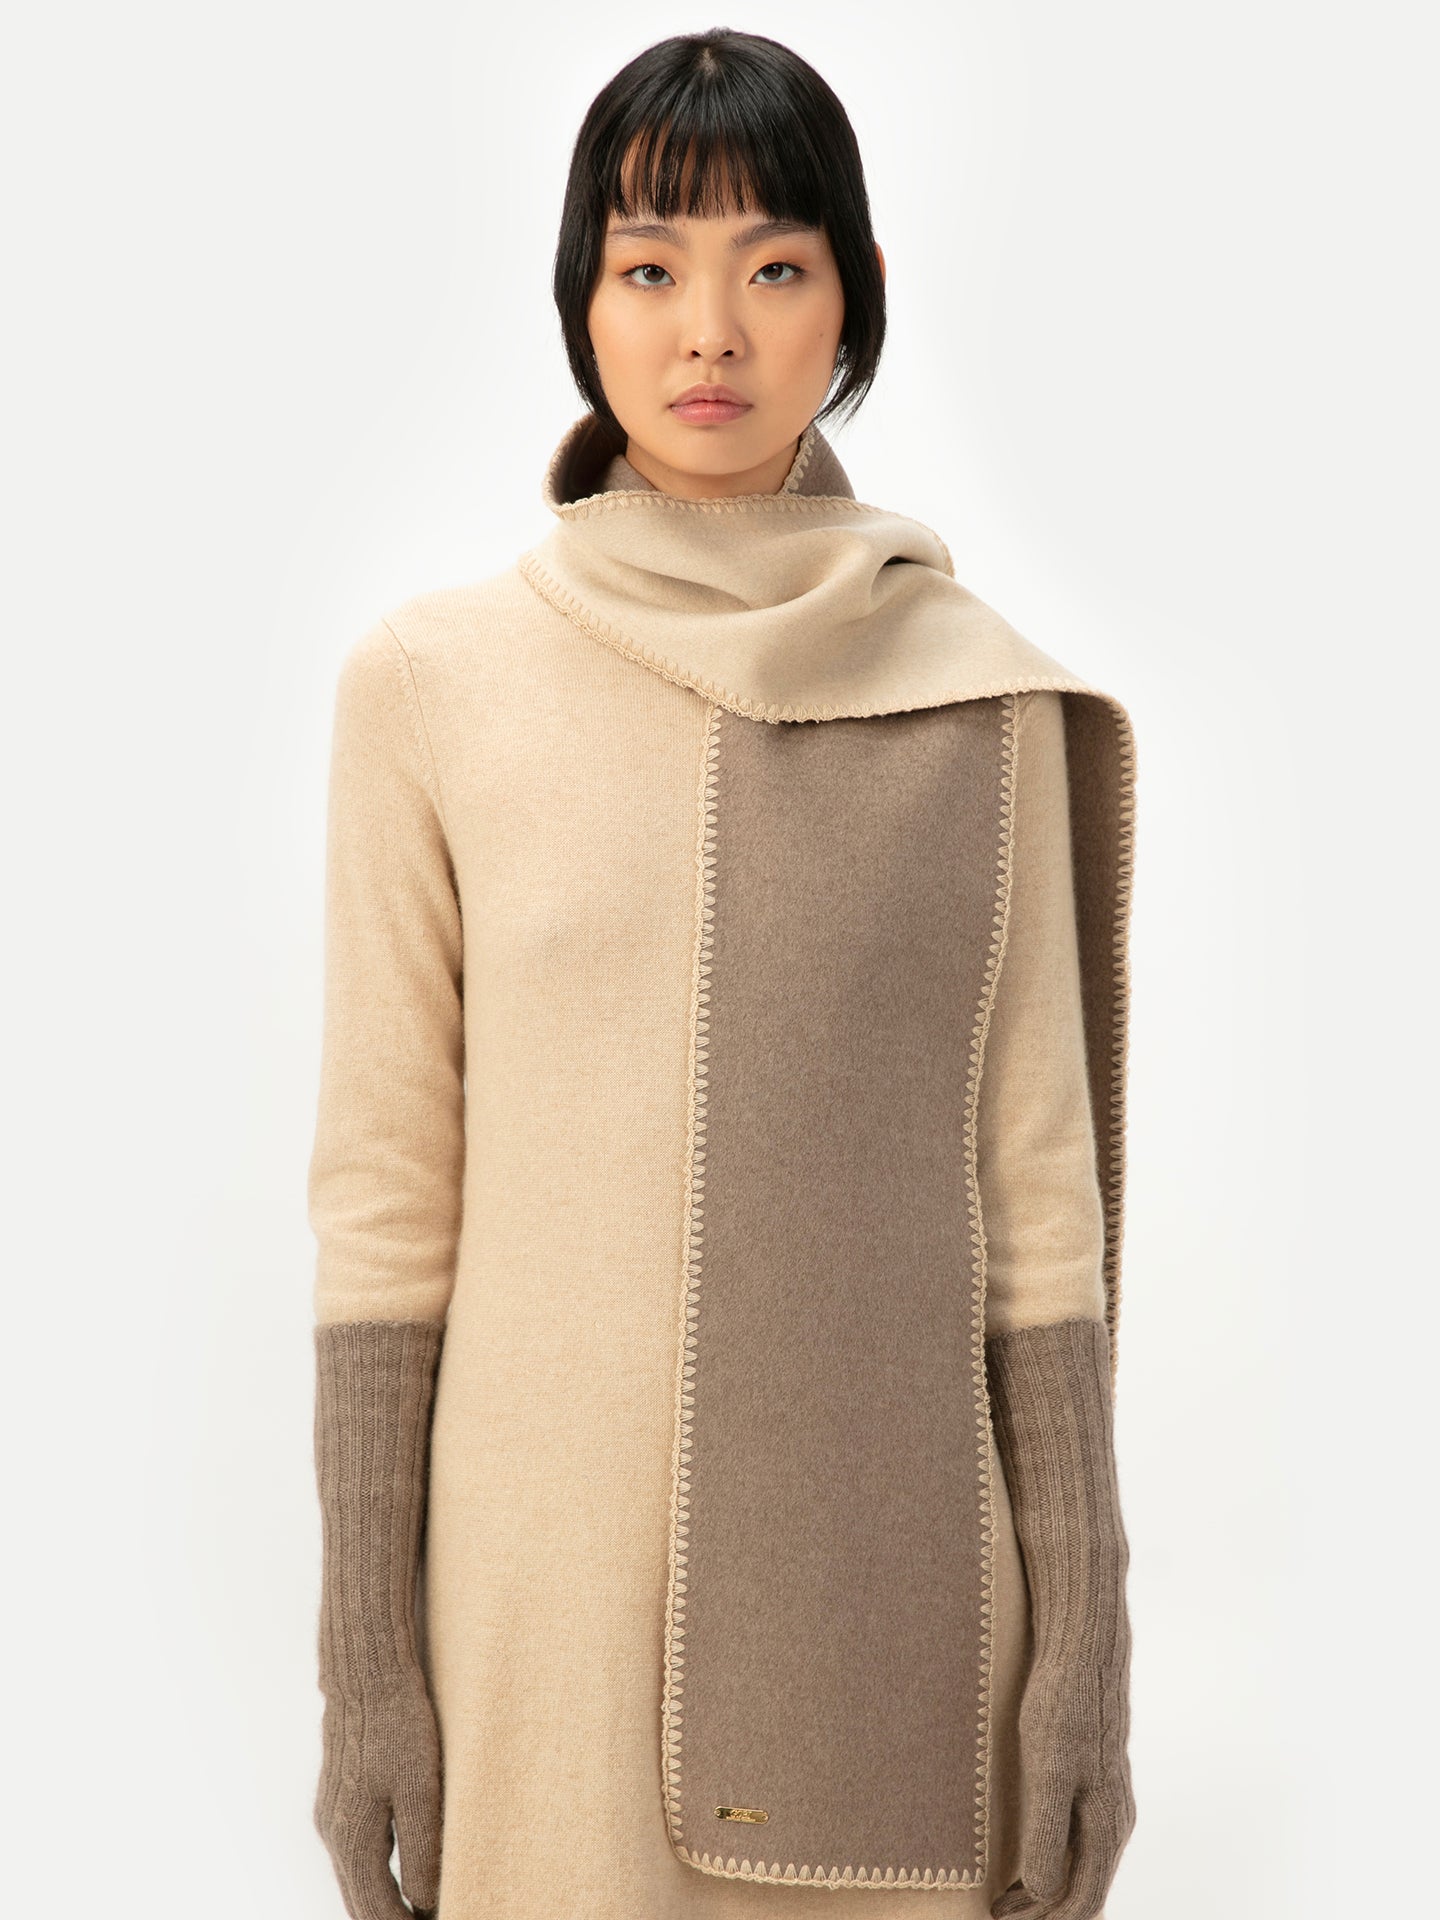 Unisex Cashmere Scarf in Dual Organic Colors Taupe - Gobi Cashmere